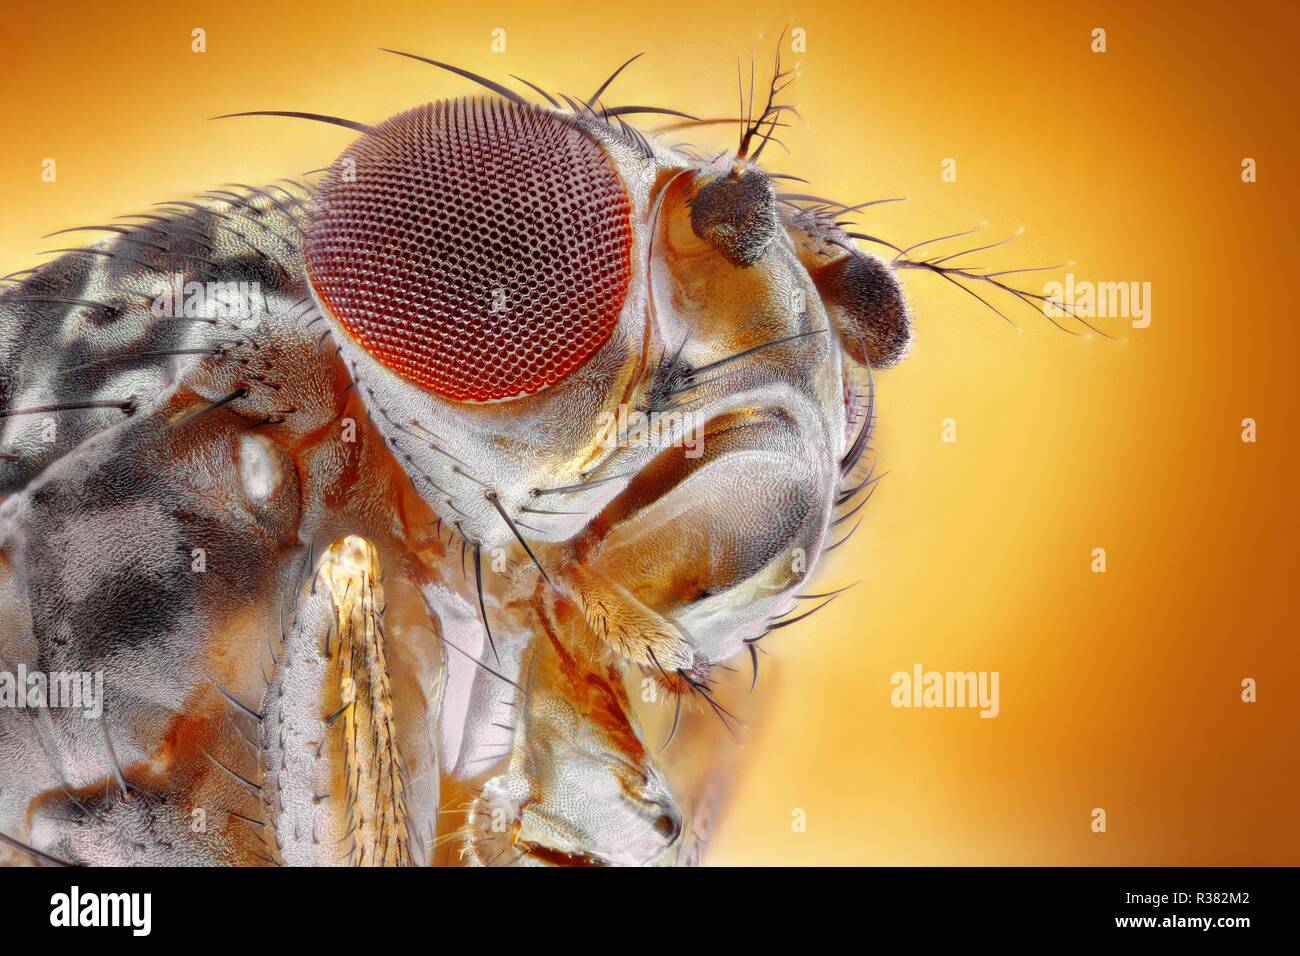 Extreme sharp and detailed image of the fruit fly at an extreme magnification taken with a microscope objective. Stock Photo